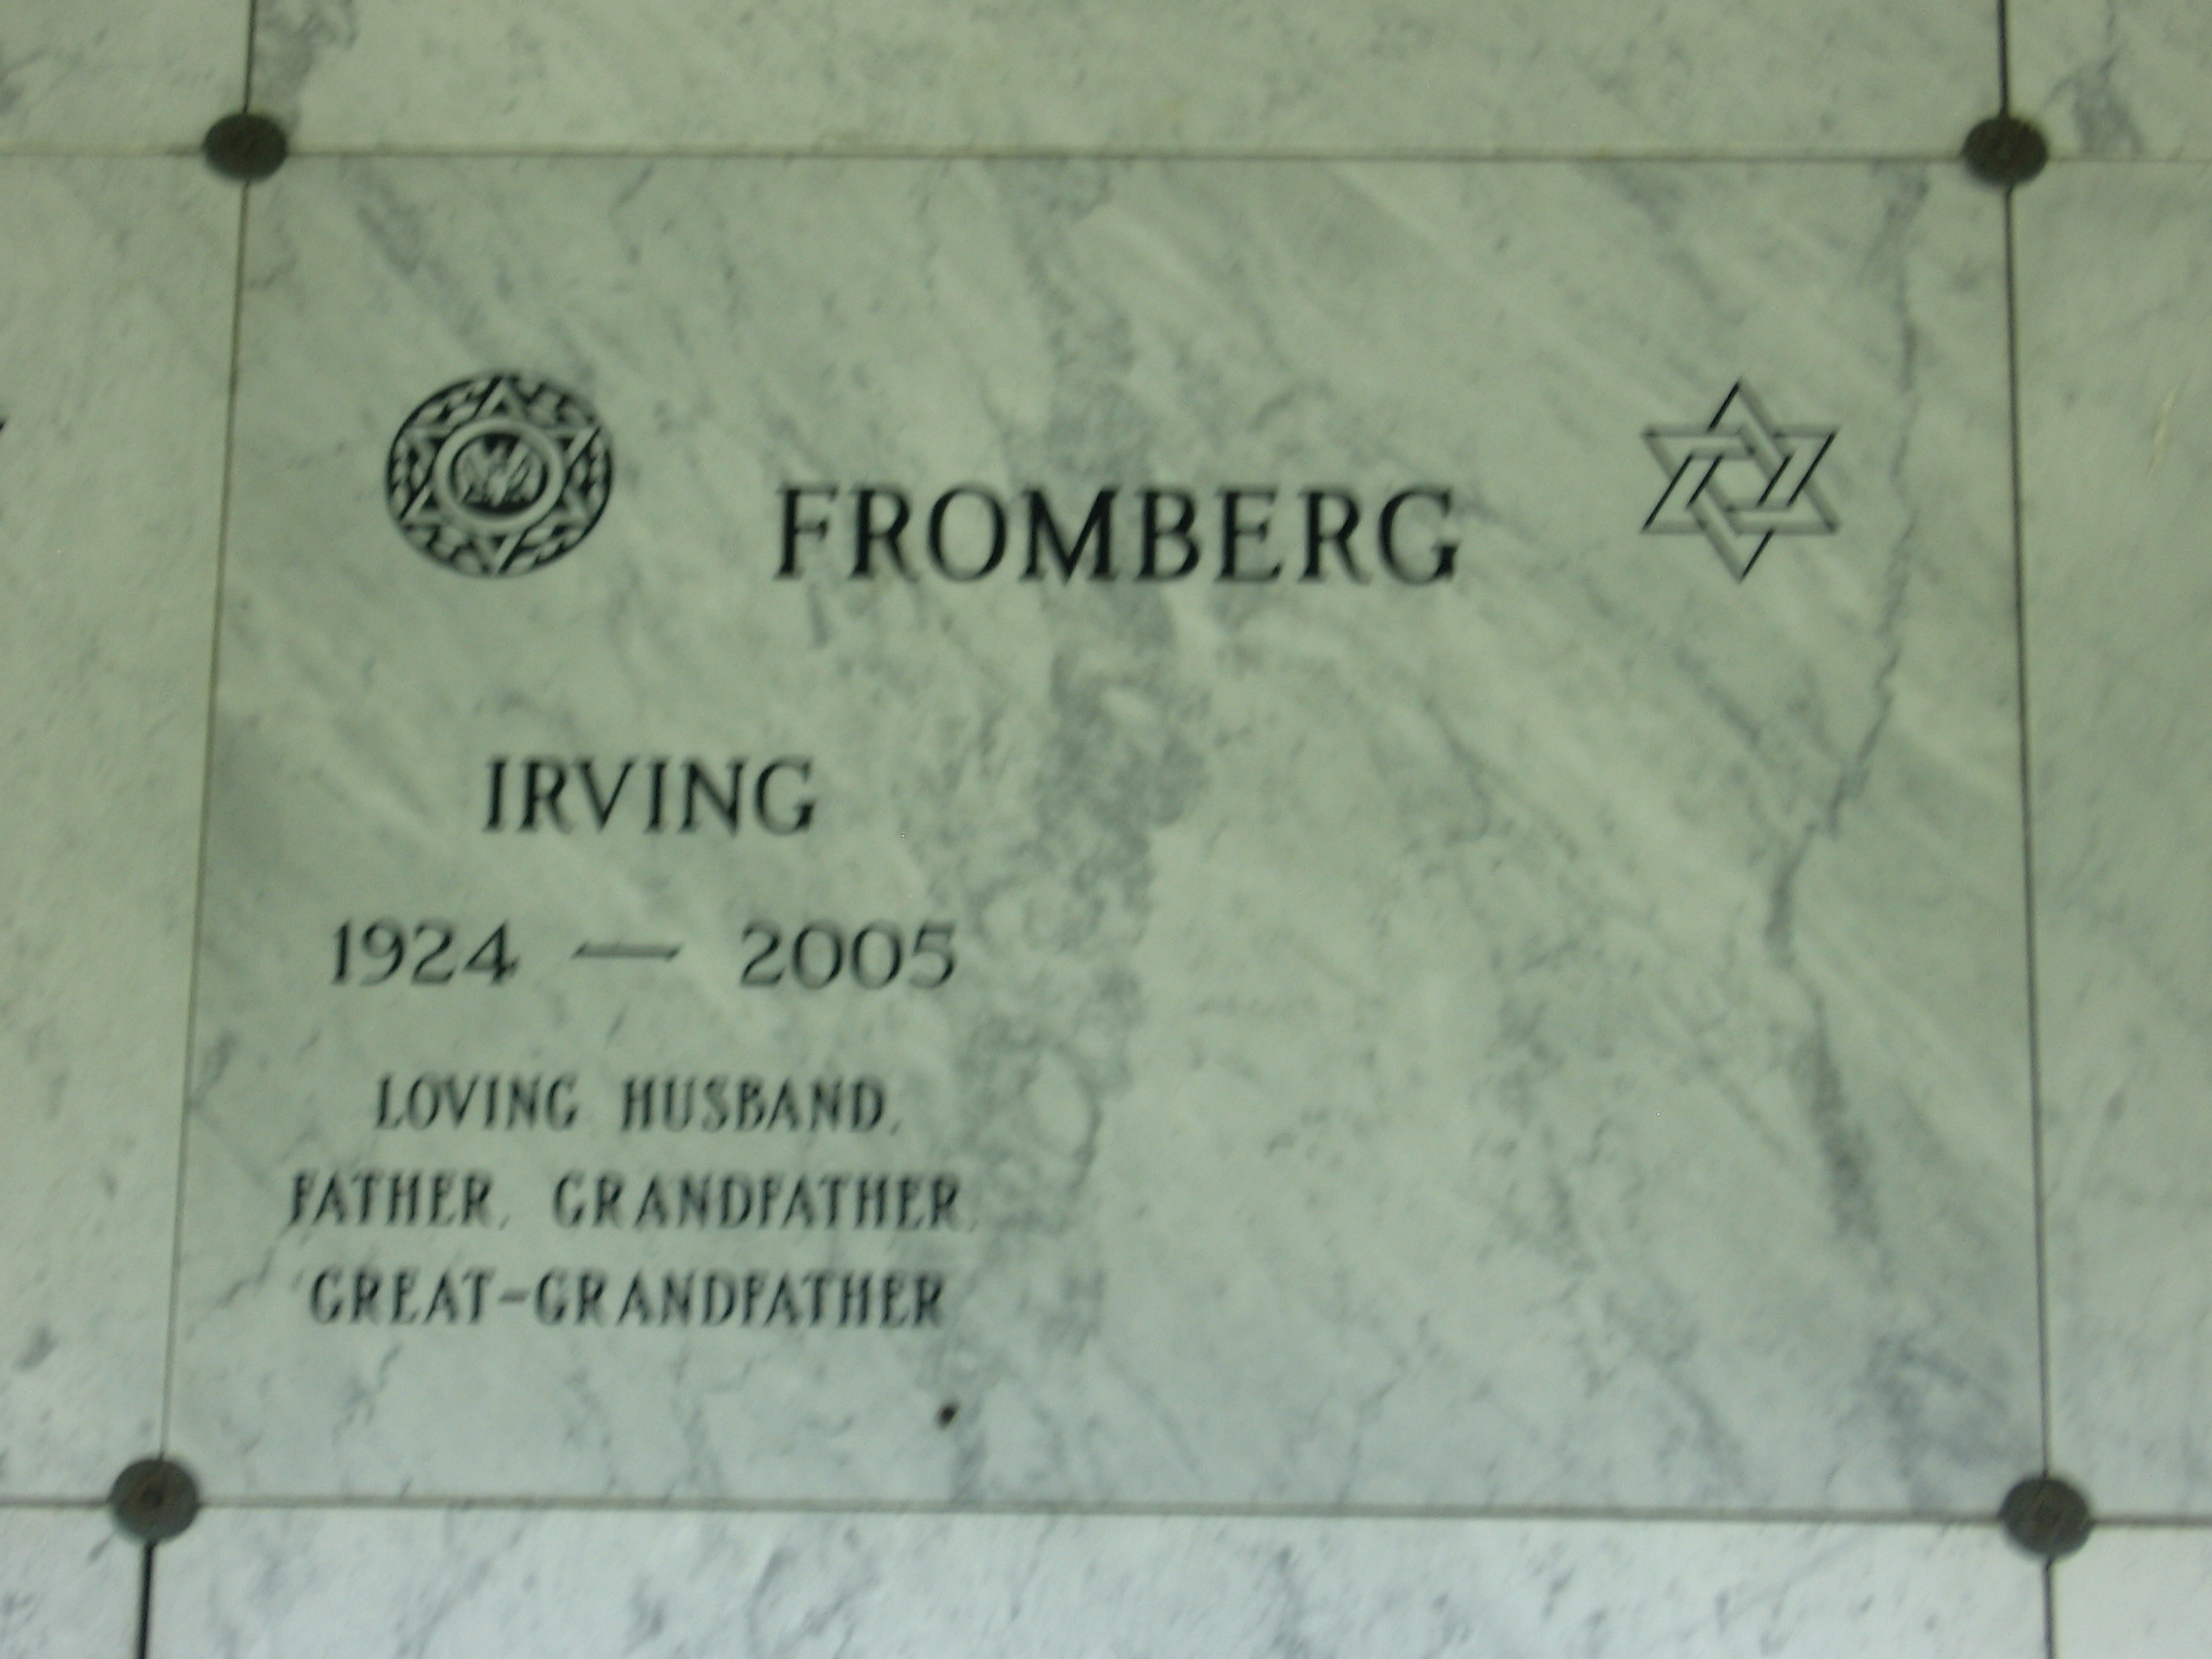 Irving Fromberg